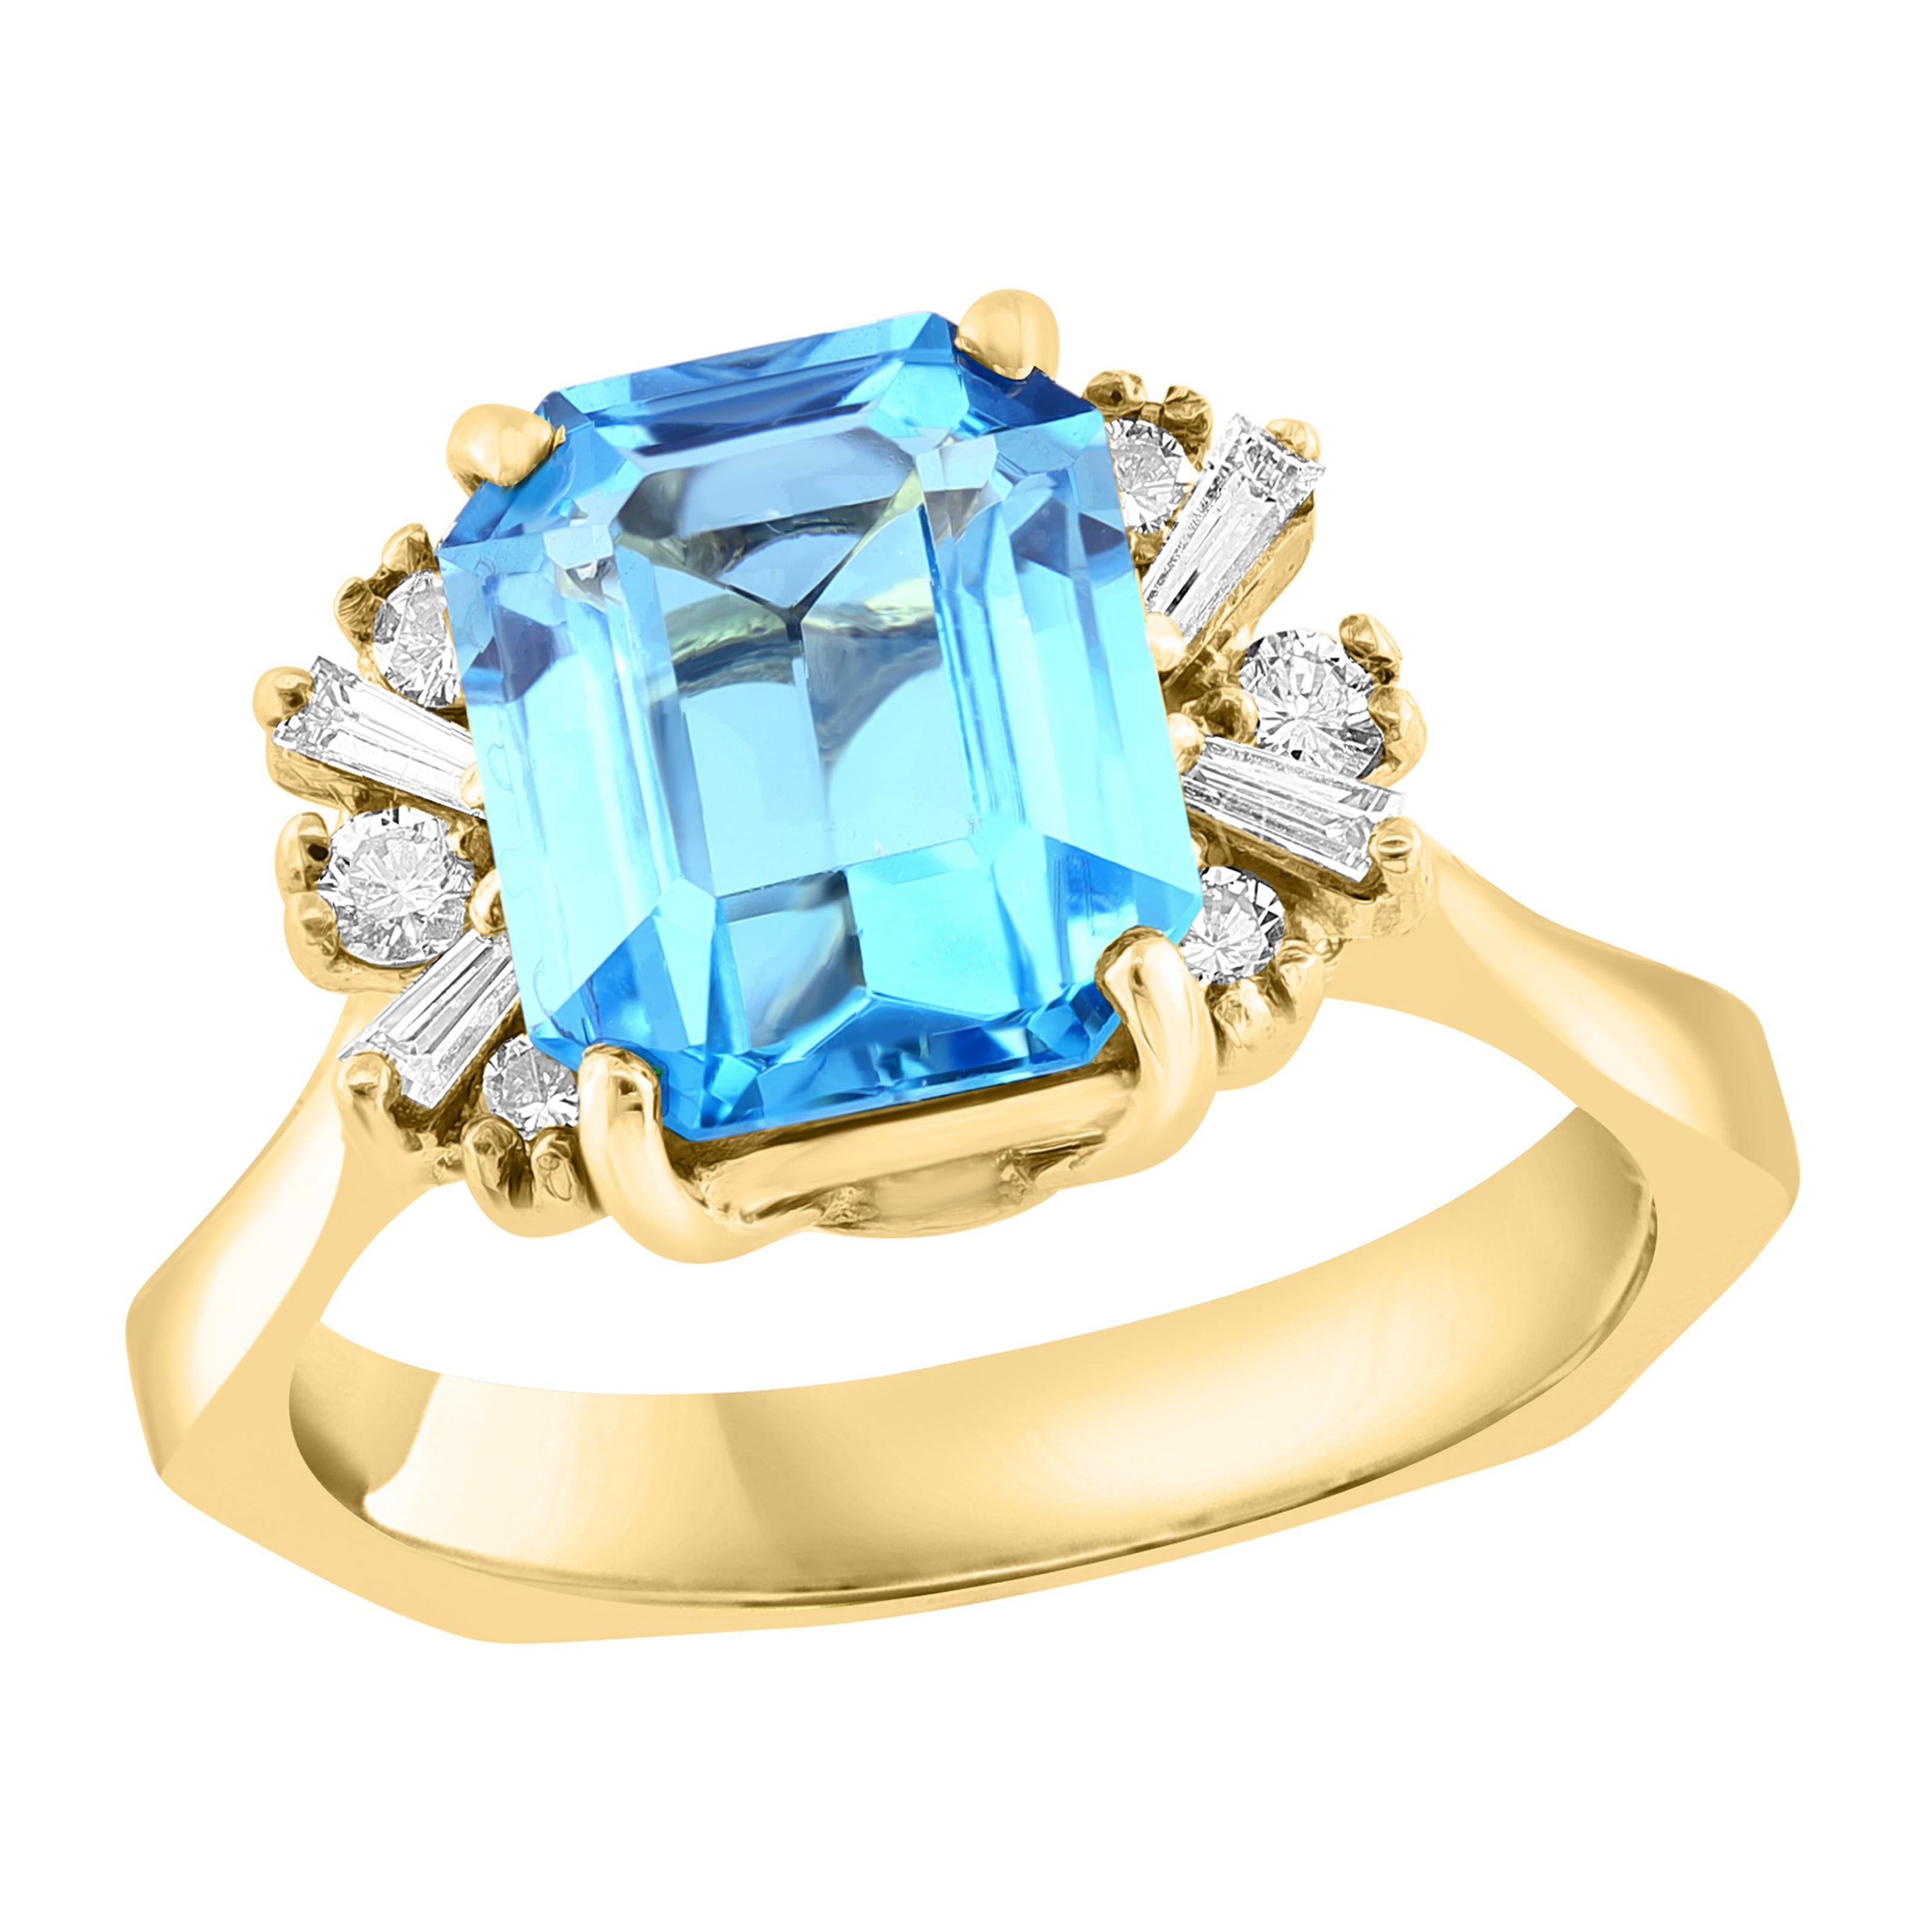 3.98 Carat Emerald Cut Blue Topaz and Diamond Ring in 14K Yellow Gold